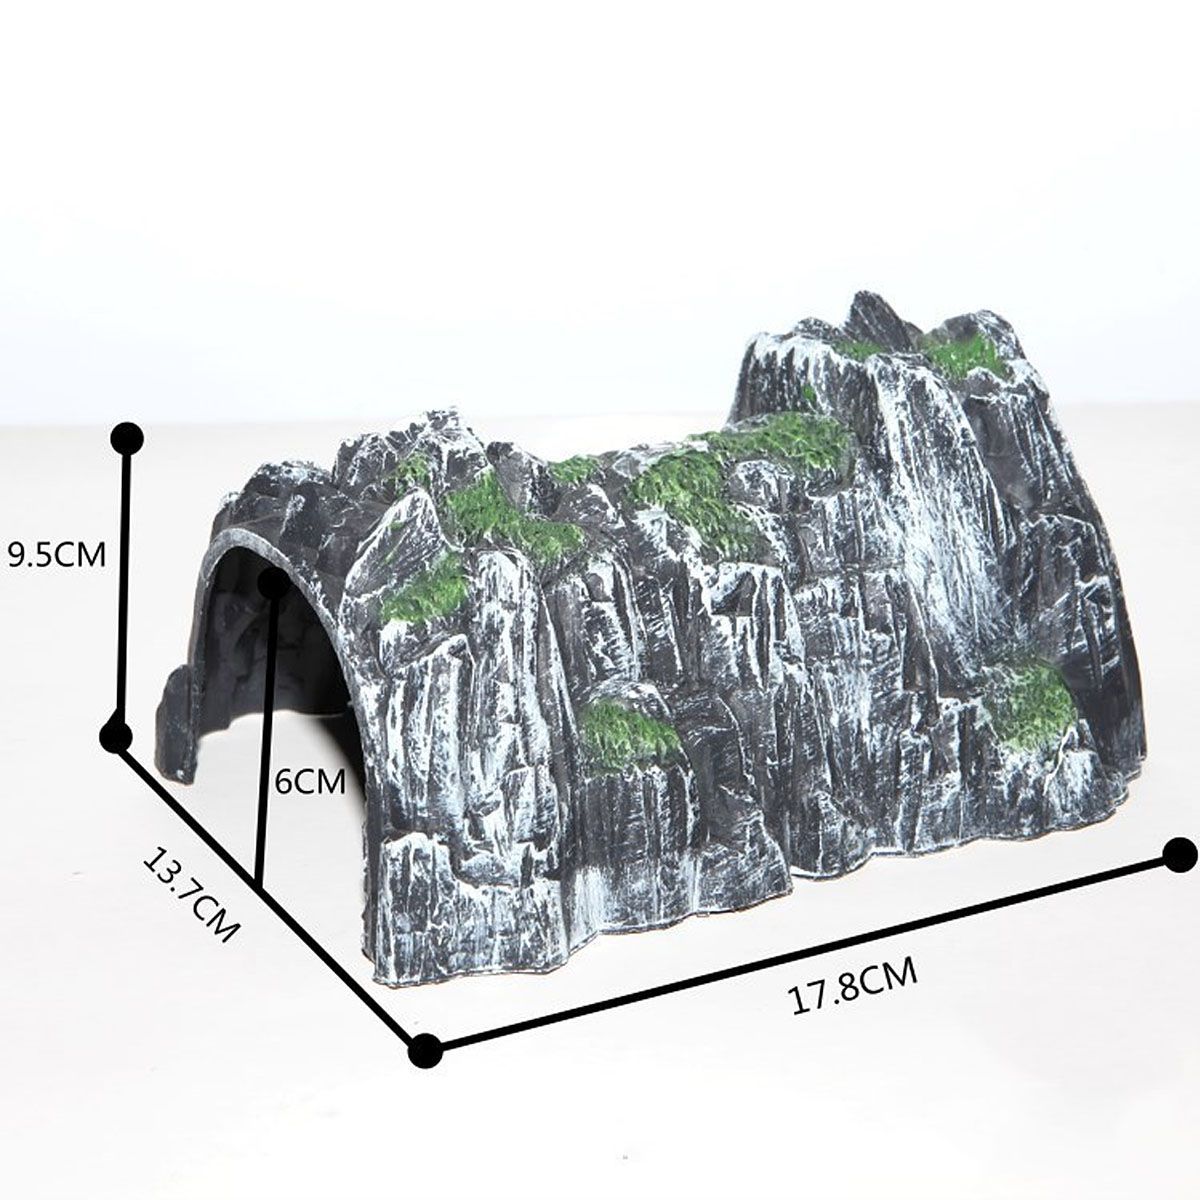 178CM-Plastic-Scale-Model-Toy-Train-Railway-Cave-Tunnels-Sand-Table-Decorations-1614806